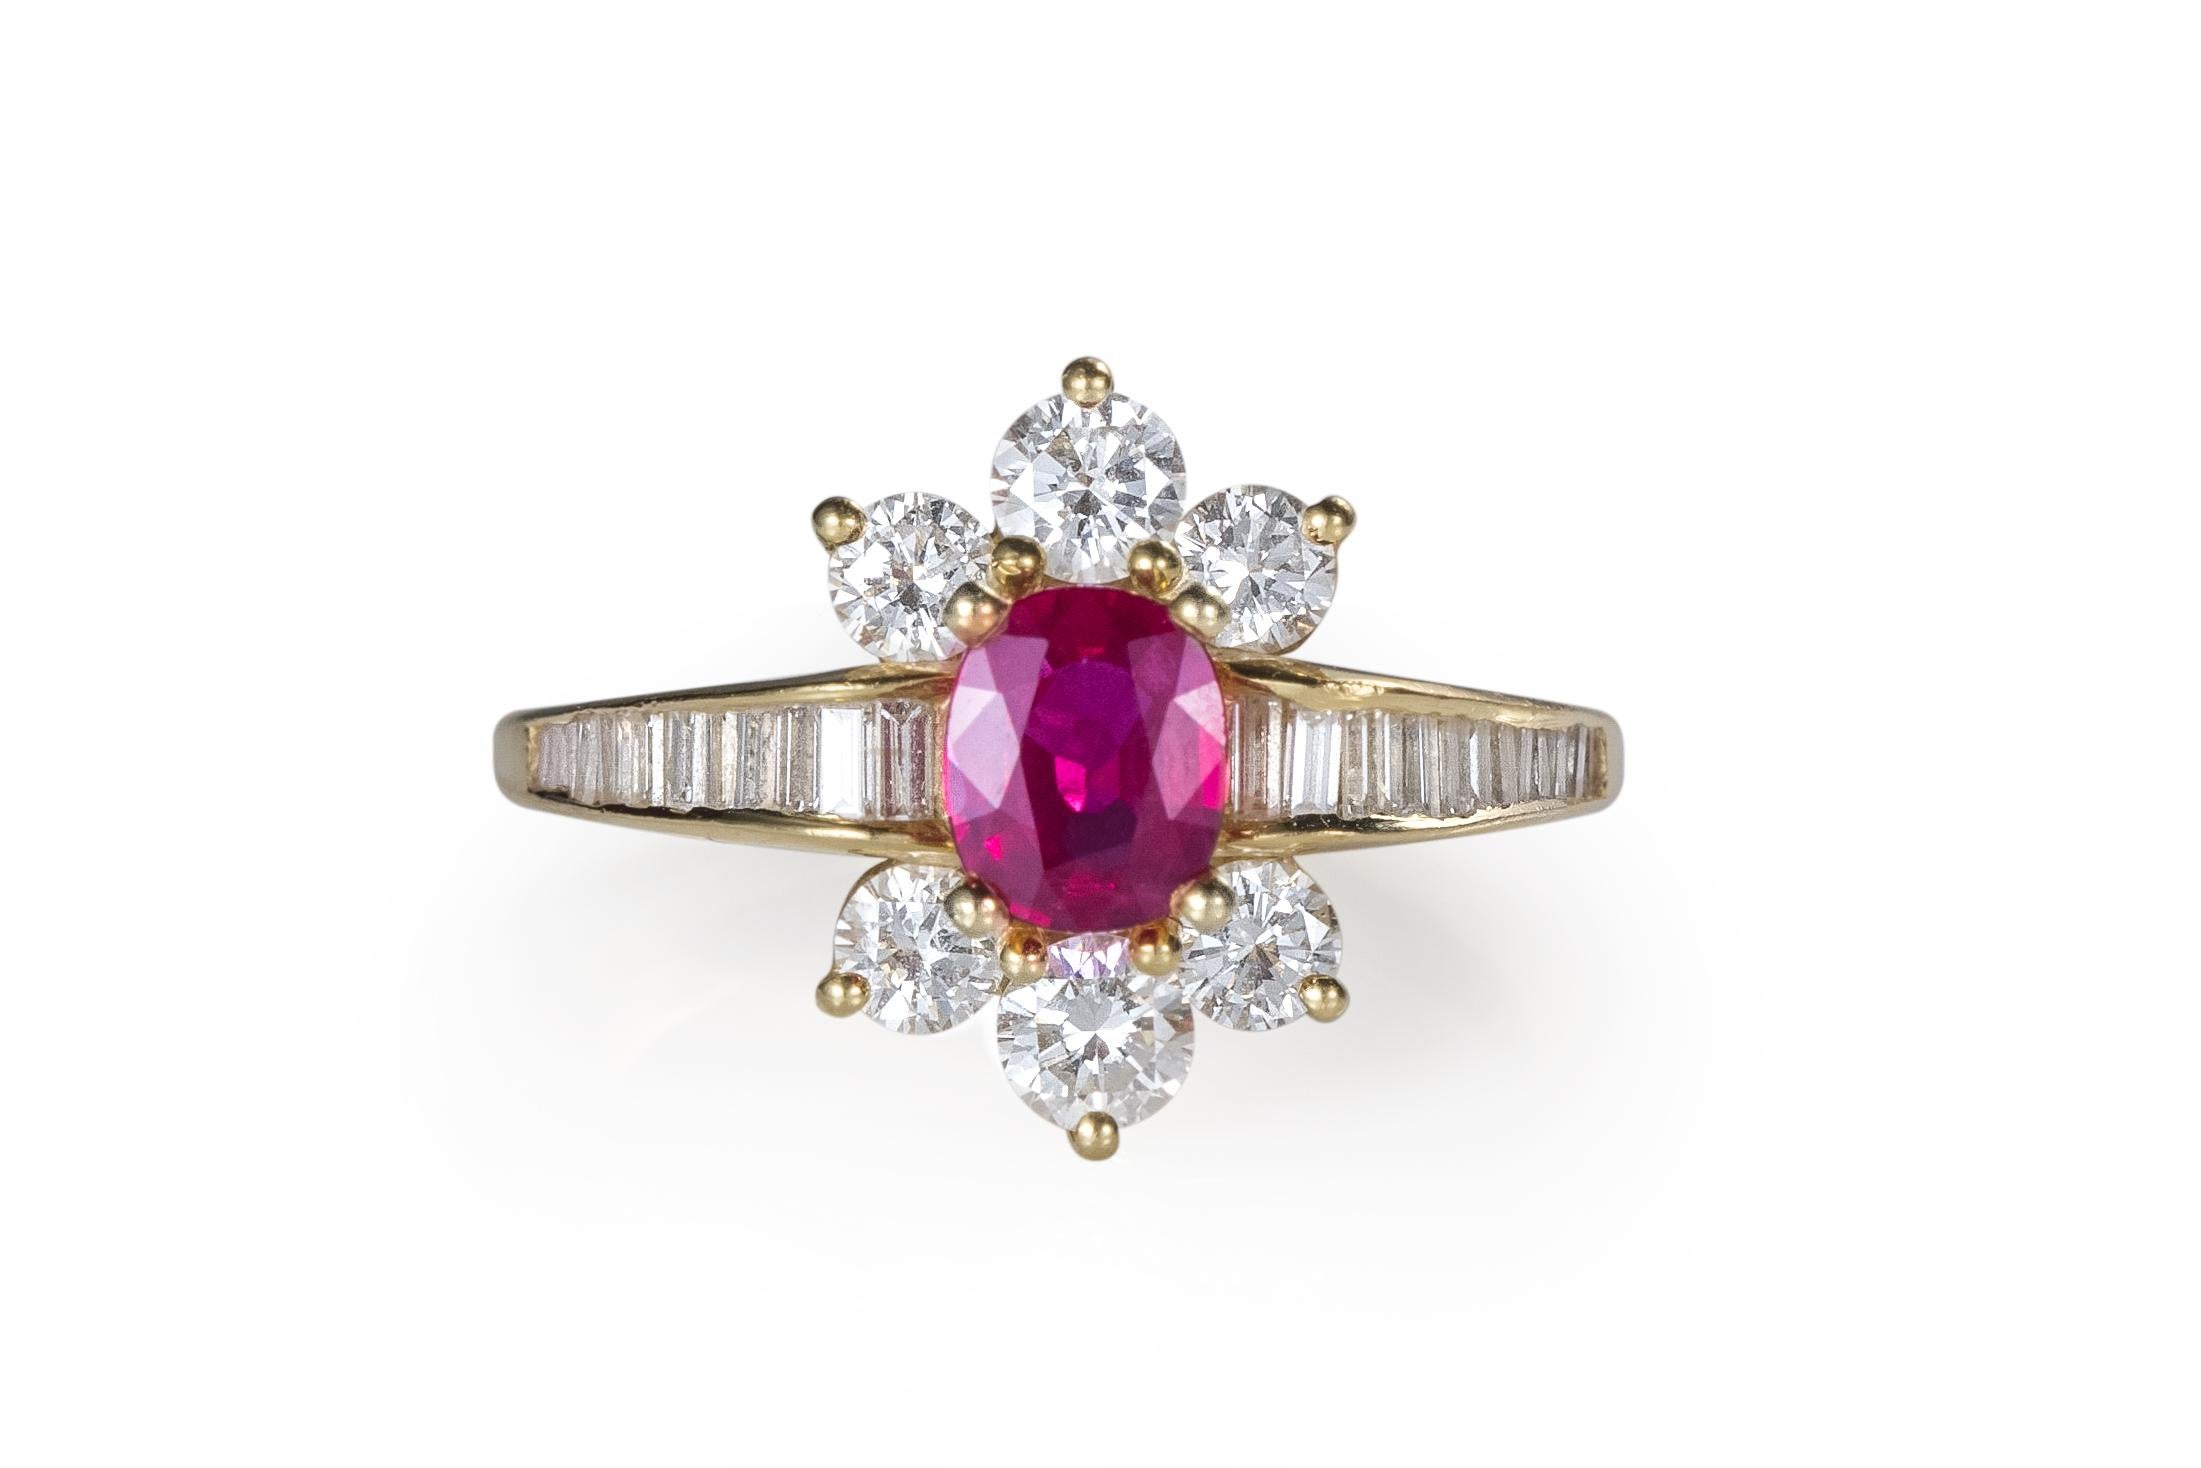 Item Details:
Metal Type: 18 Karat Yellow Gold
Weight: 5 grams
Size: 7 (Resizable)

Ruby Details:
Carat: .90 Carat
Cut: Oval Brilliant
Color: Blood Red 
Gem Quality 

Diamond Details:
Cut: Round Brilliant and Baguette Cut
Color: E F
Clarity: